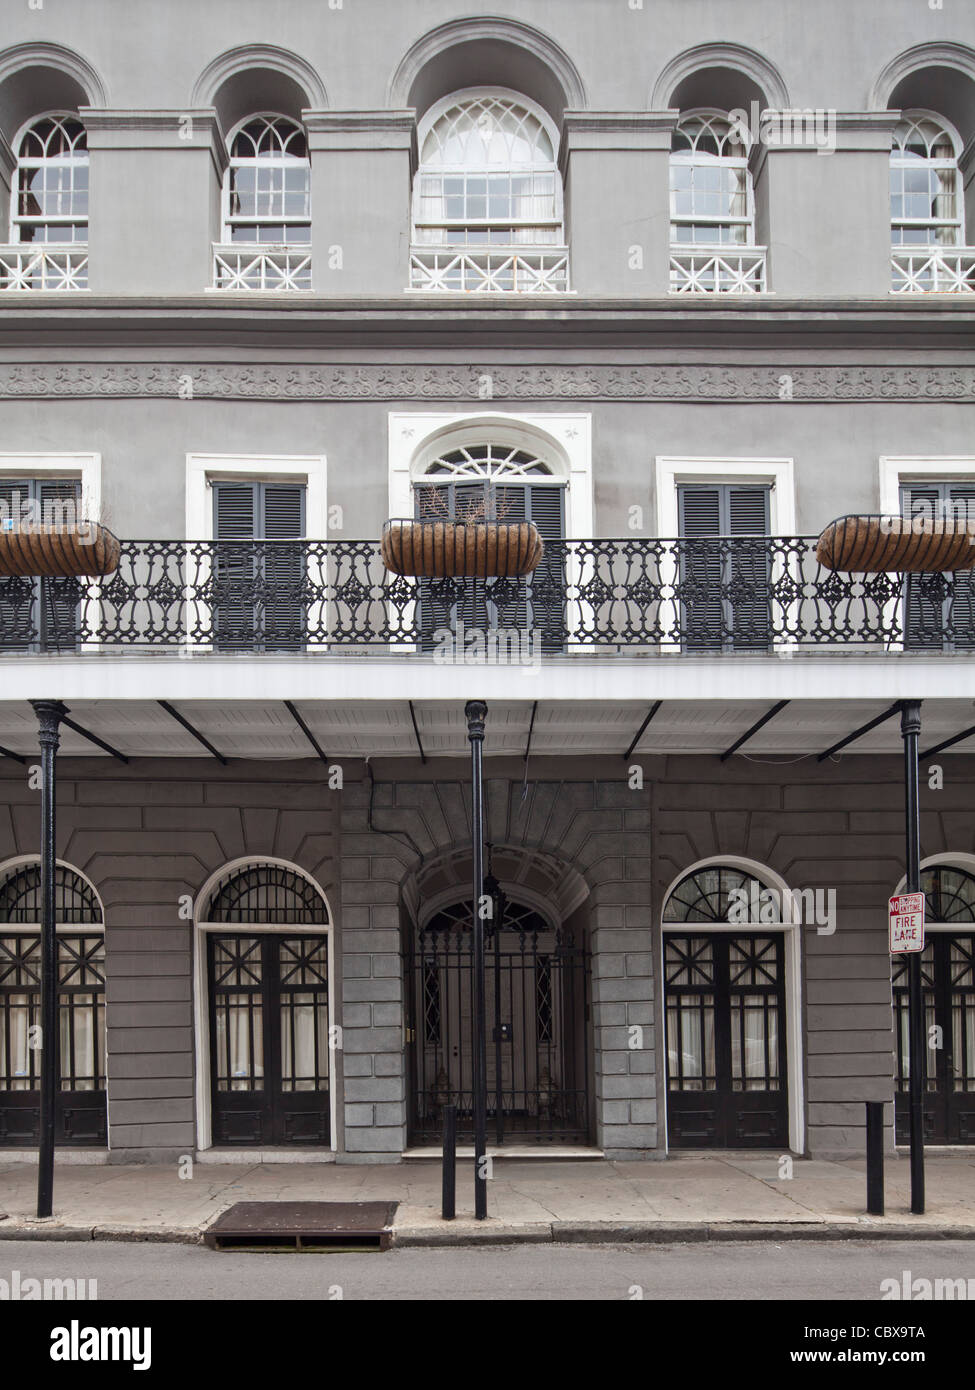 Lalaurie Home, New Orleans Stock Photo